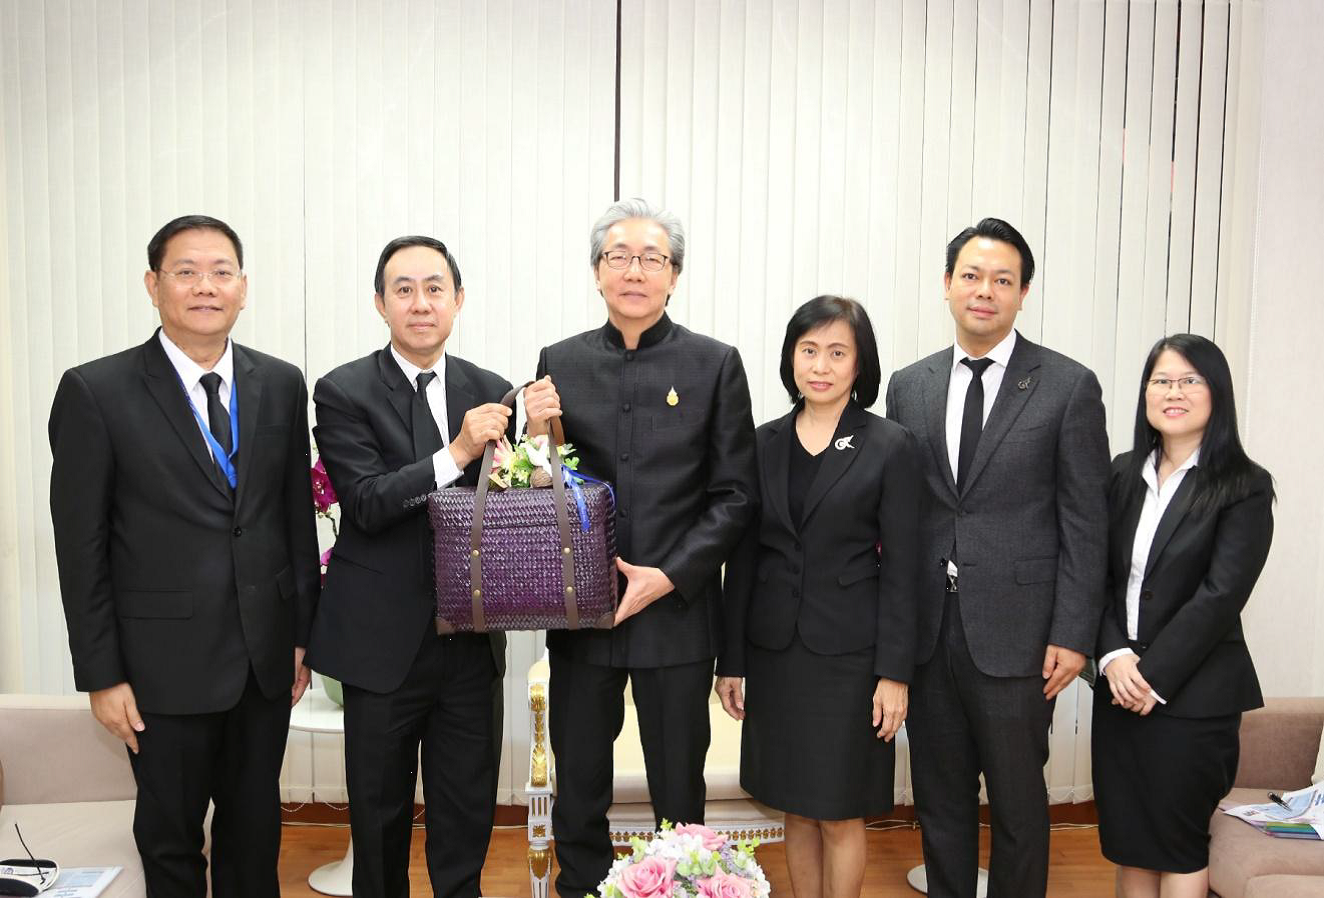 EXIM Thailand Visits Deputy Prime Minister to Extend New Year 2017 Greetings